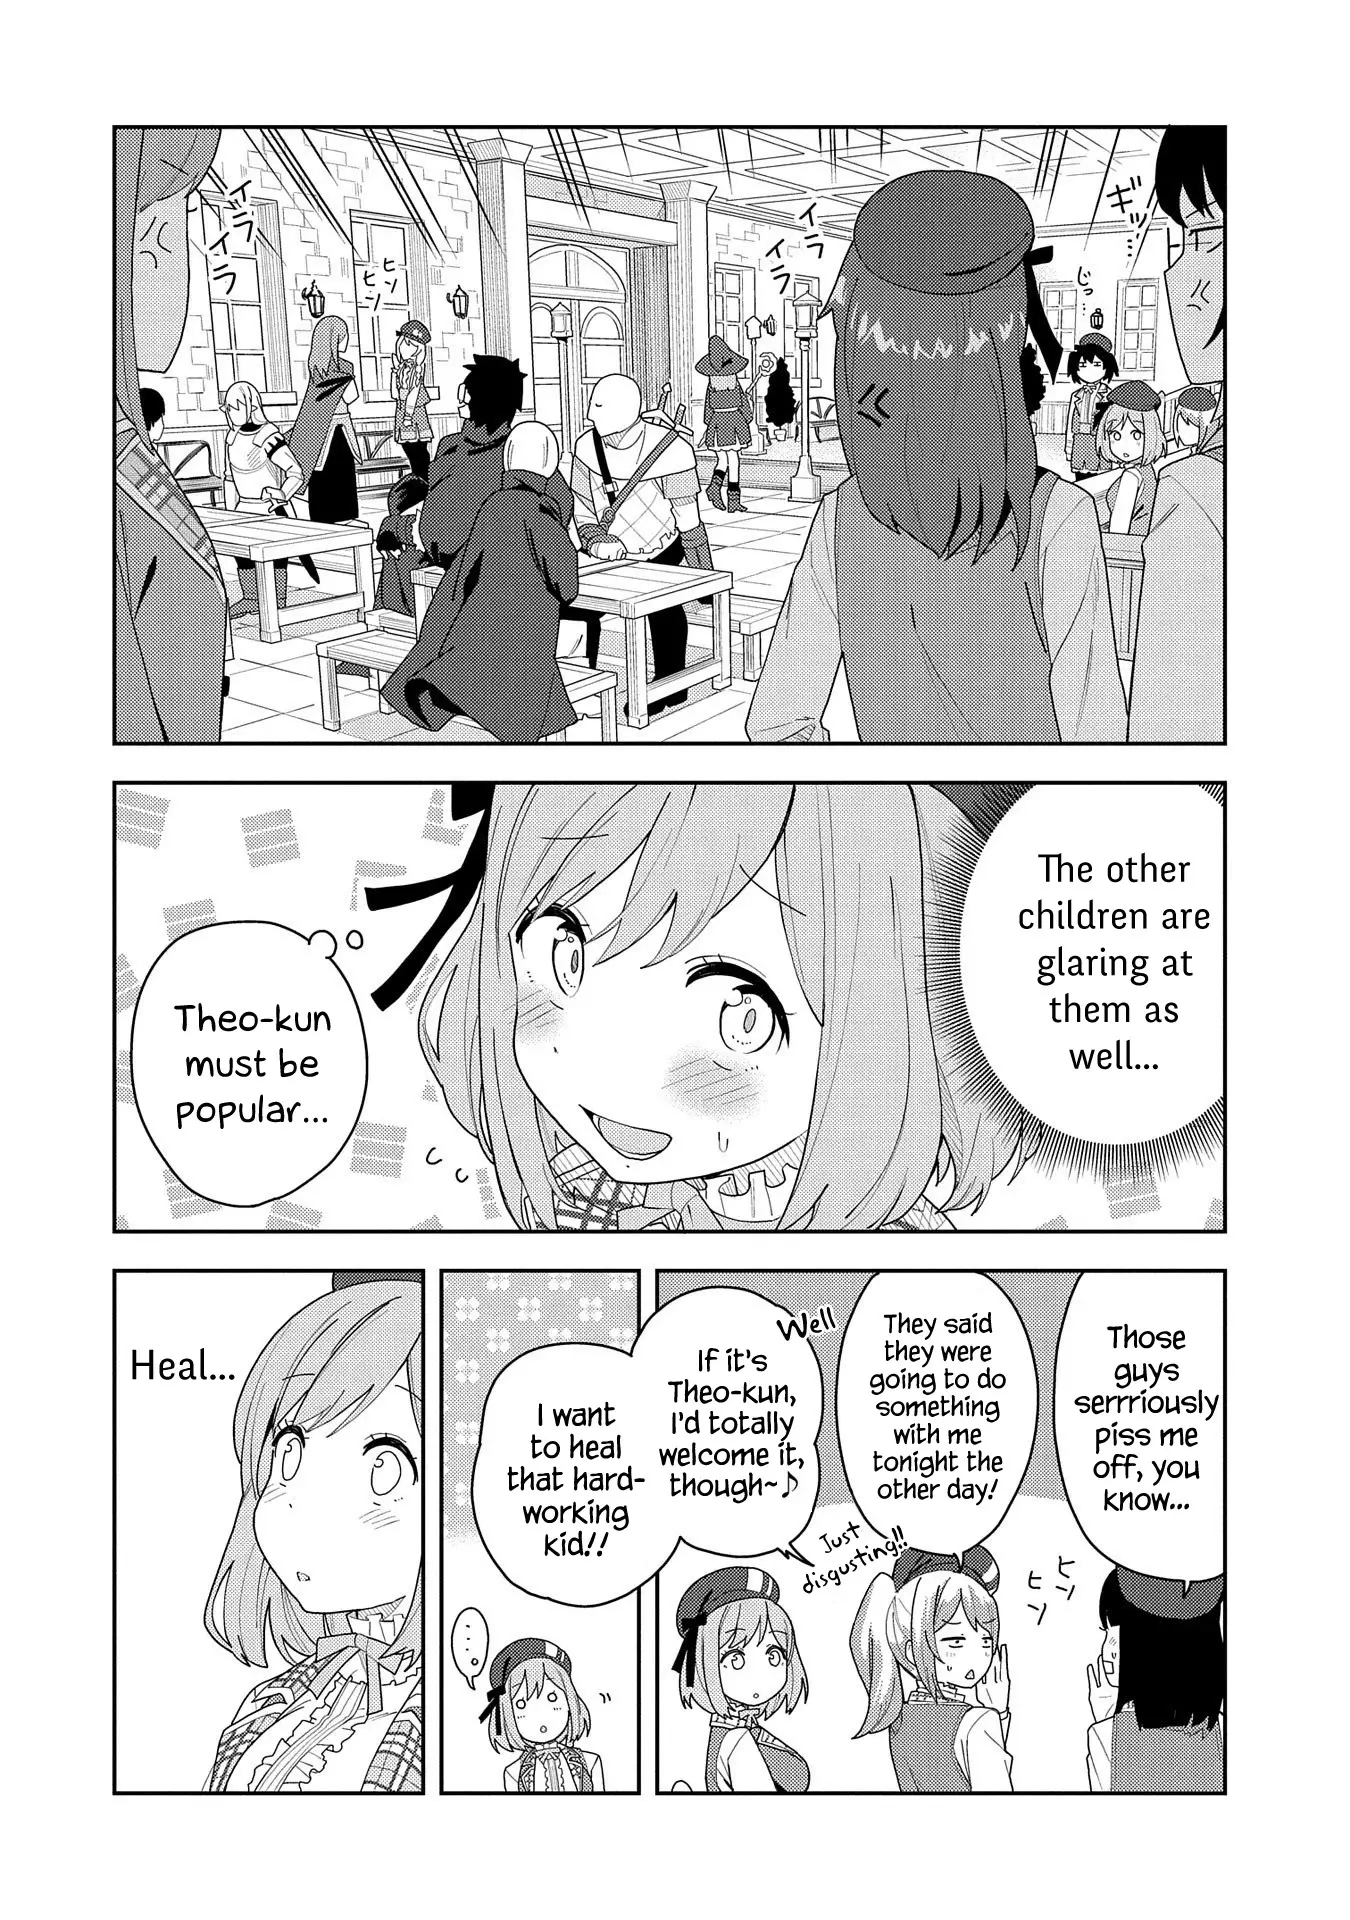 I Summoned The Devil To Grant Me A Wish, But I Married Her Instead Since She Was Adorable ~My New Devil Wife~ - 2 page 8